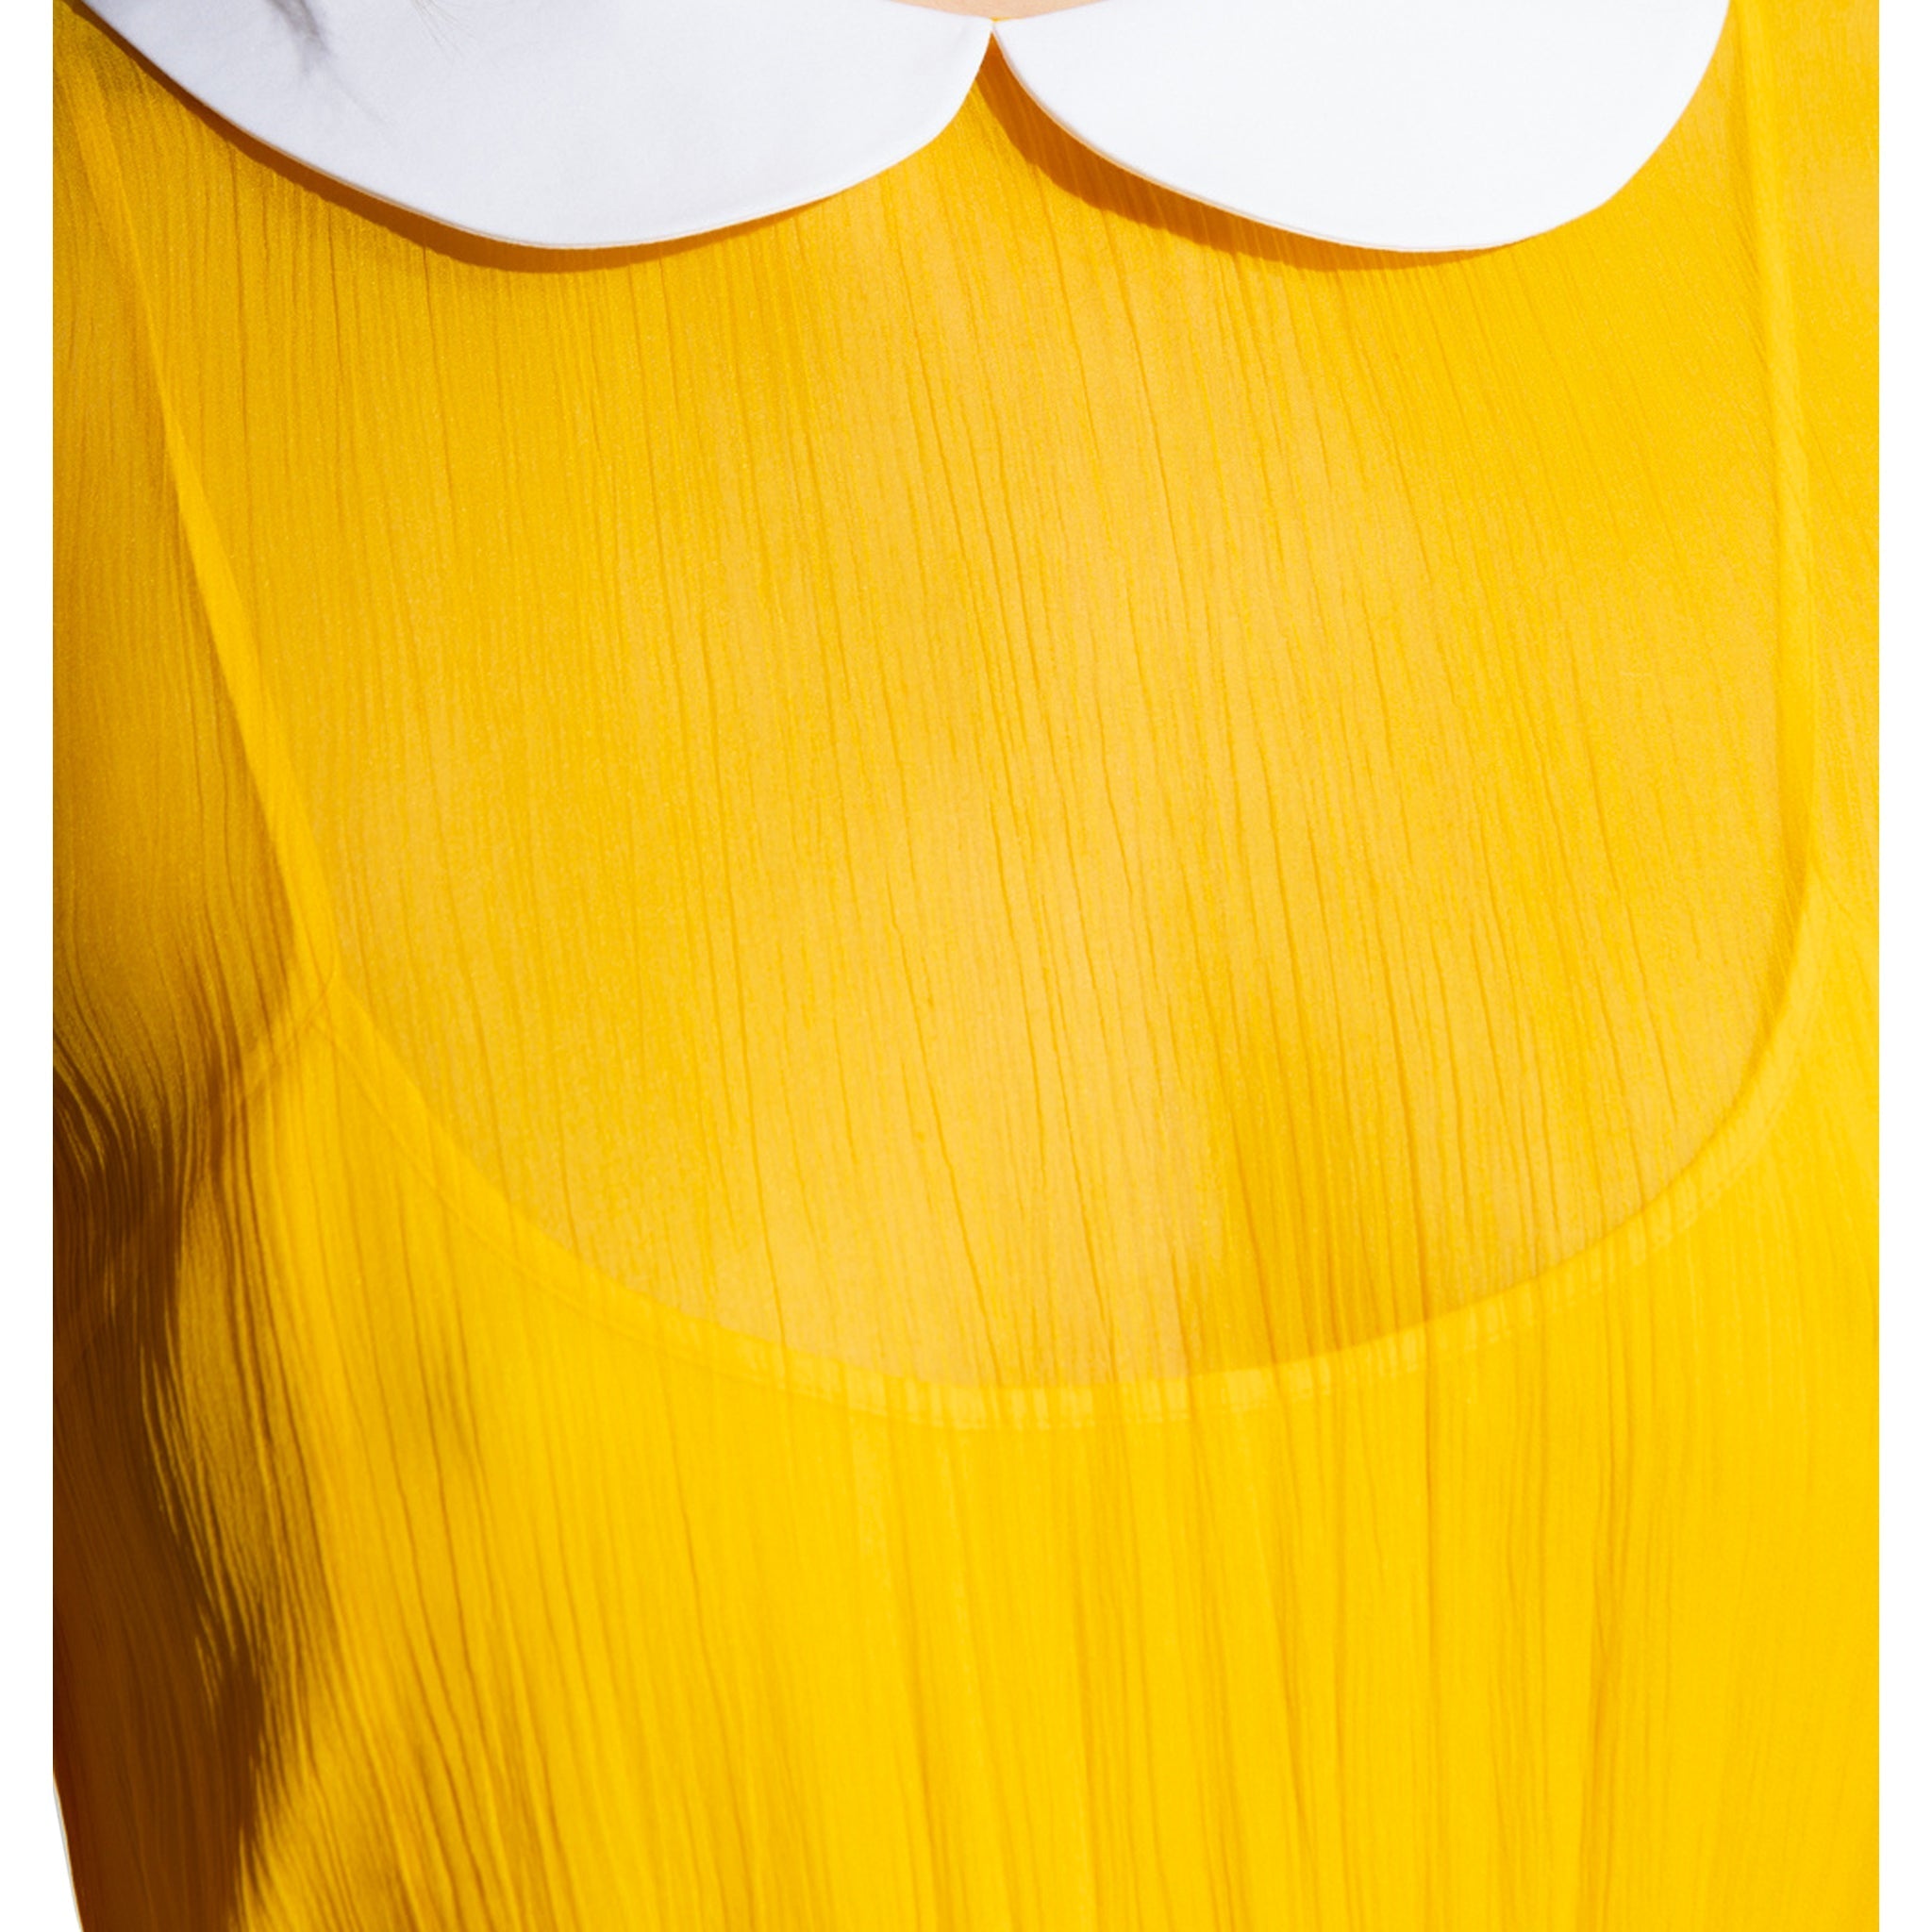 GUCCI-OUTLET-SALE-Gucci-Silk-Chiffon-Dress-WOMEN-CLOTHING-YELLOW-42-ARCHIVE-COLLECTION-4.jpg